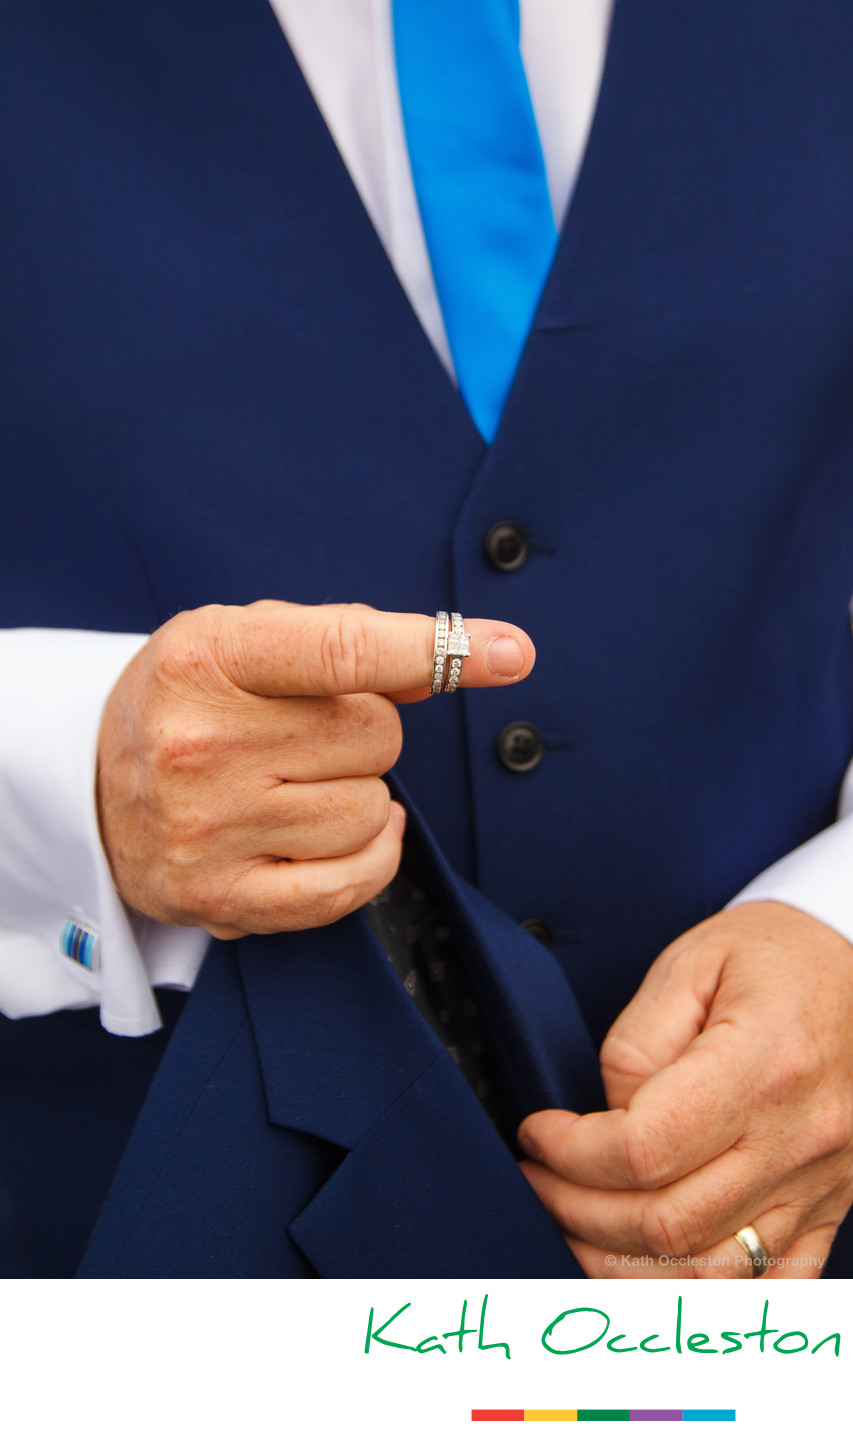 Groom with wedding rings on finger